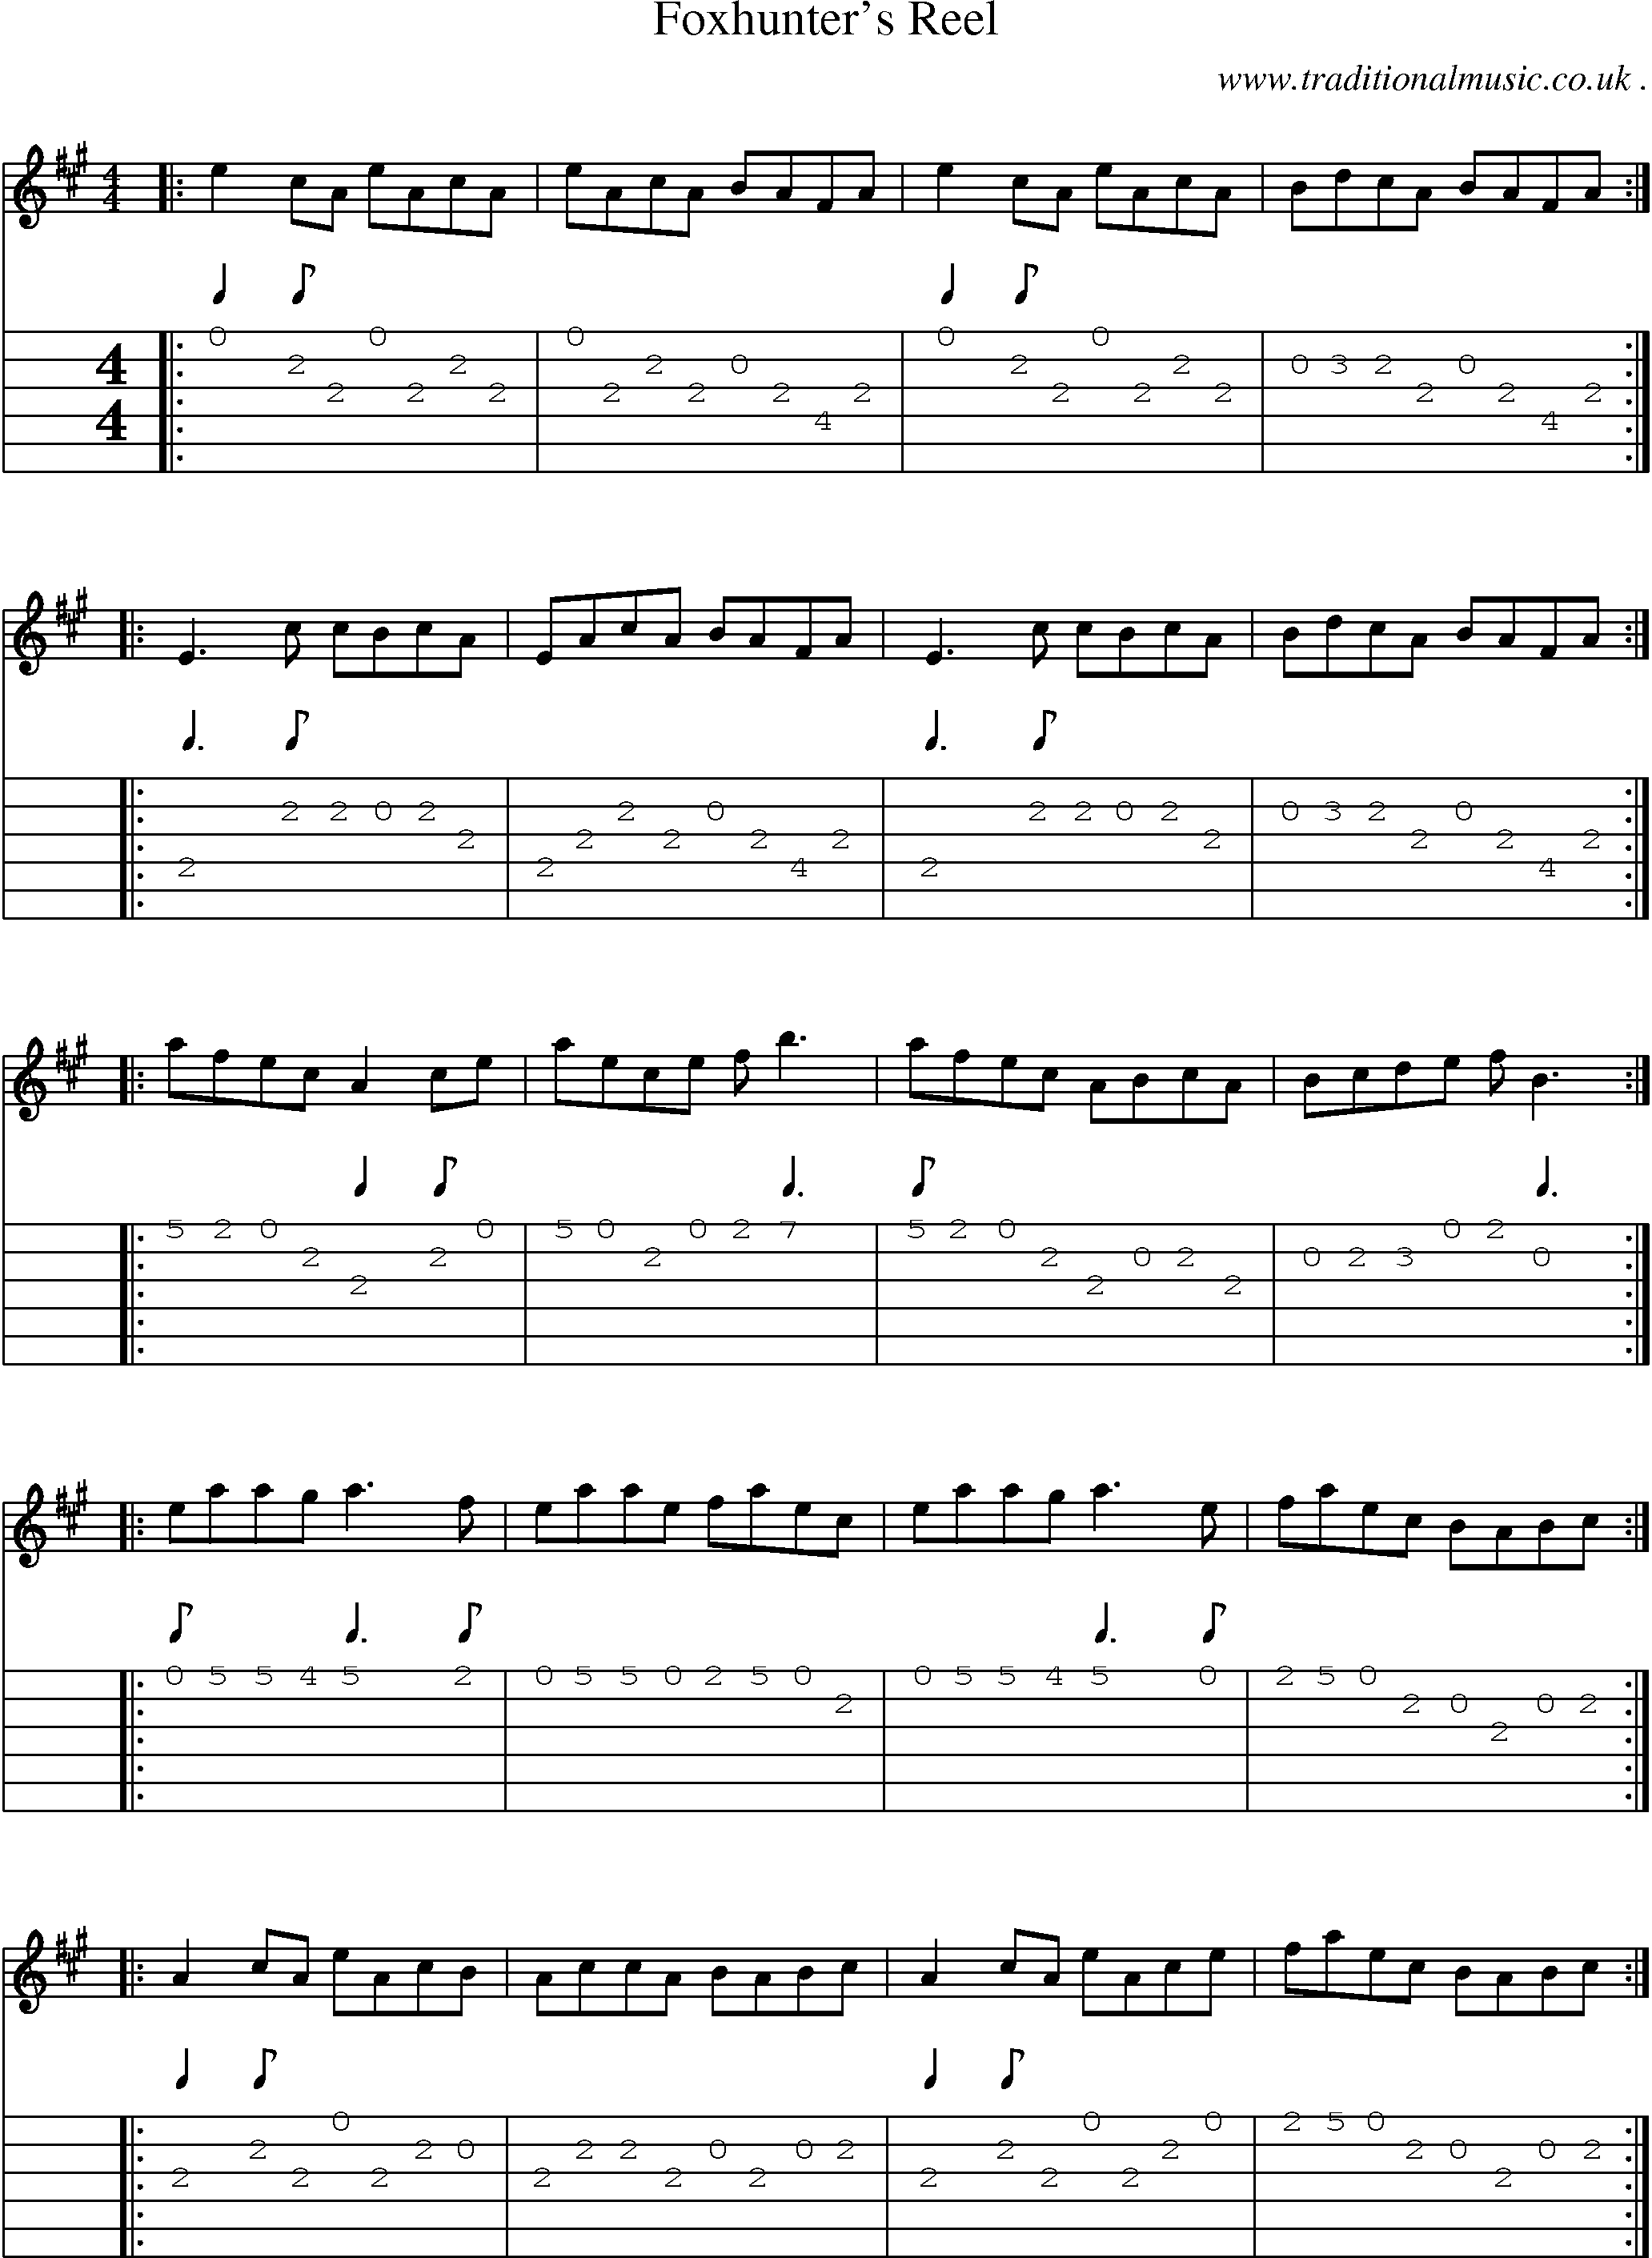 Sheet-Music and Guitar Tabs for Foxhunters Reel